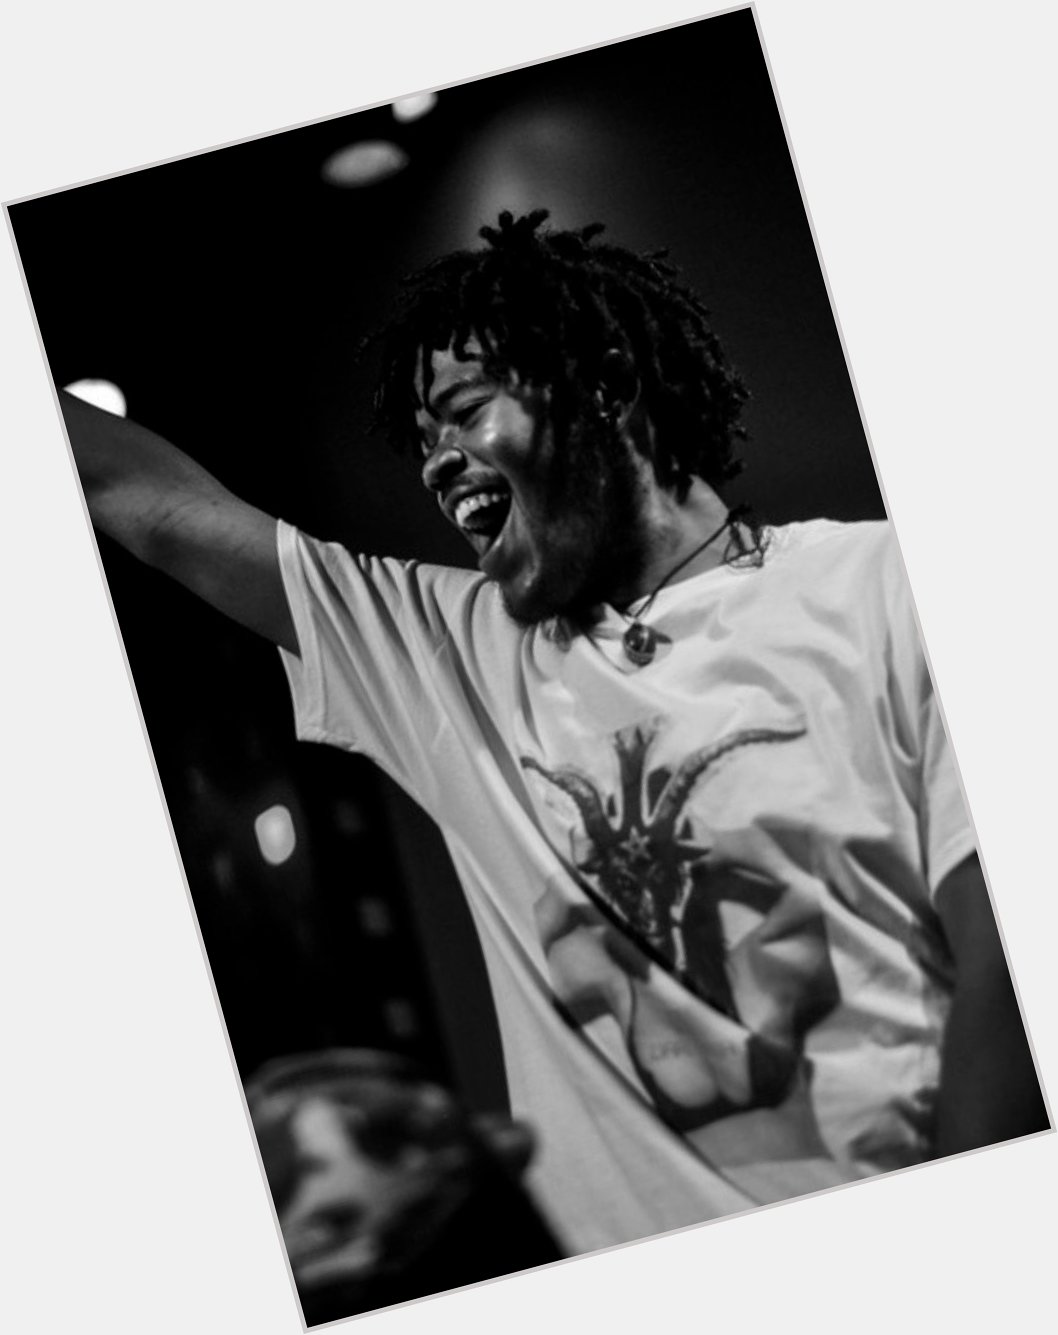 Capital STEEZ would have turned 27 today.

Happy Birthday & Rest In Peace  